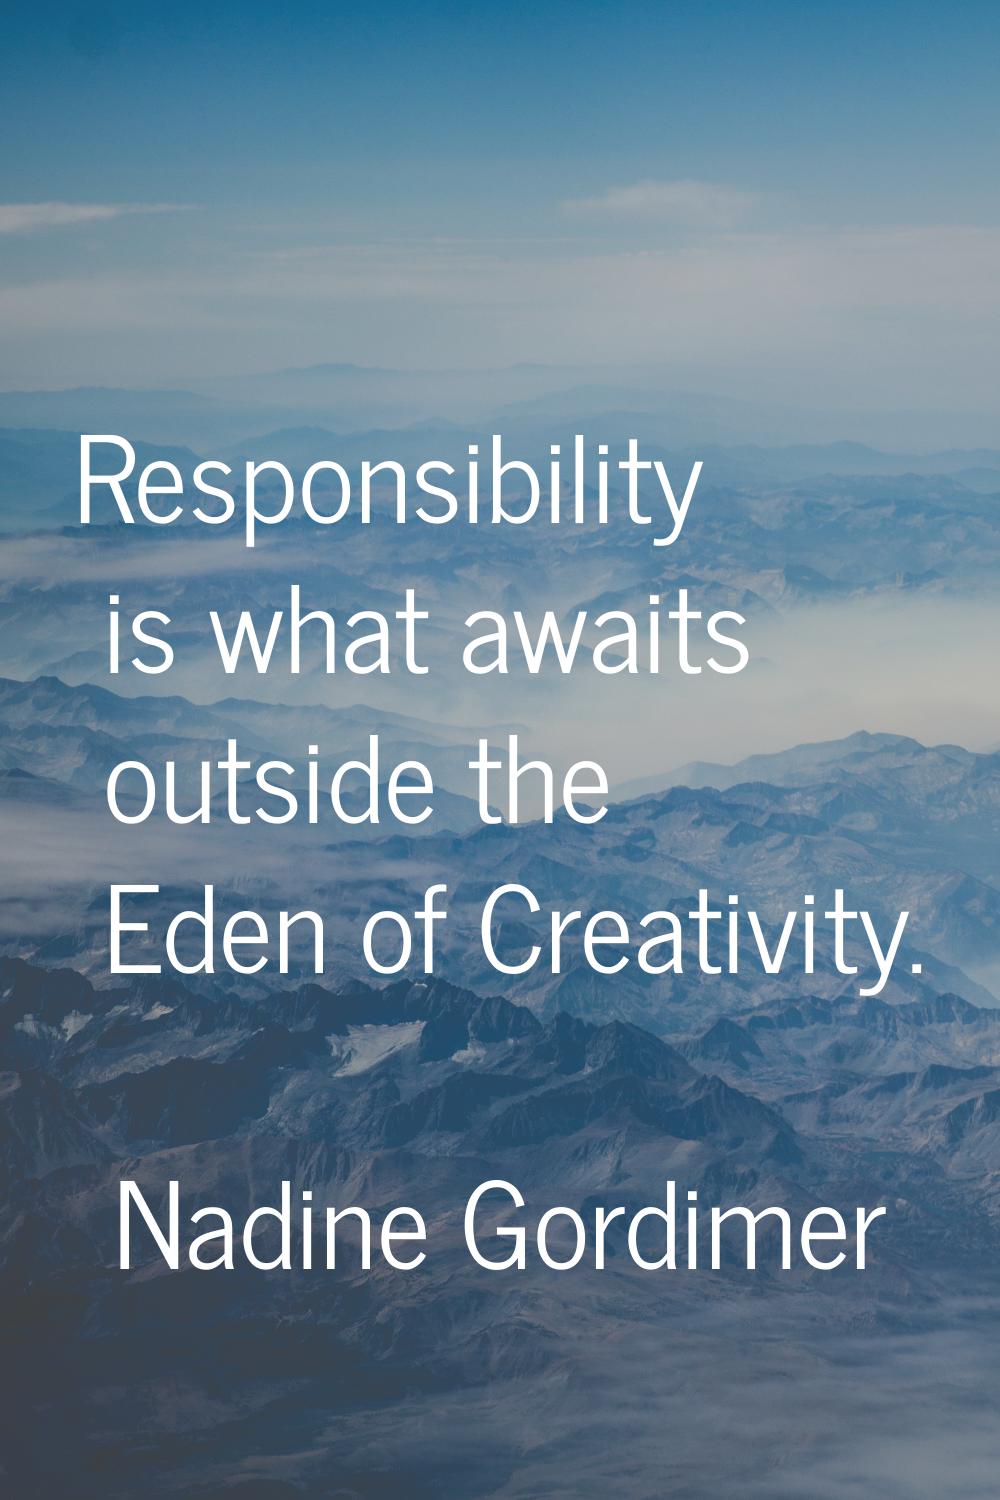 Responsibility is what awaits outside the Eden of Creativity.